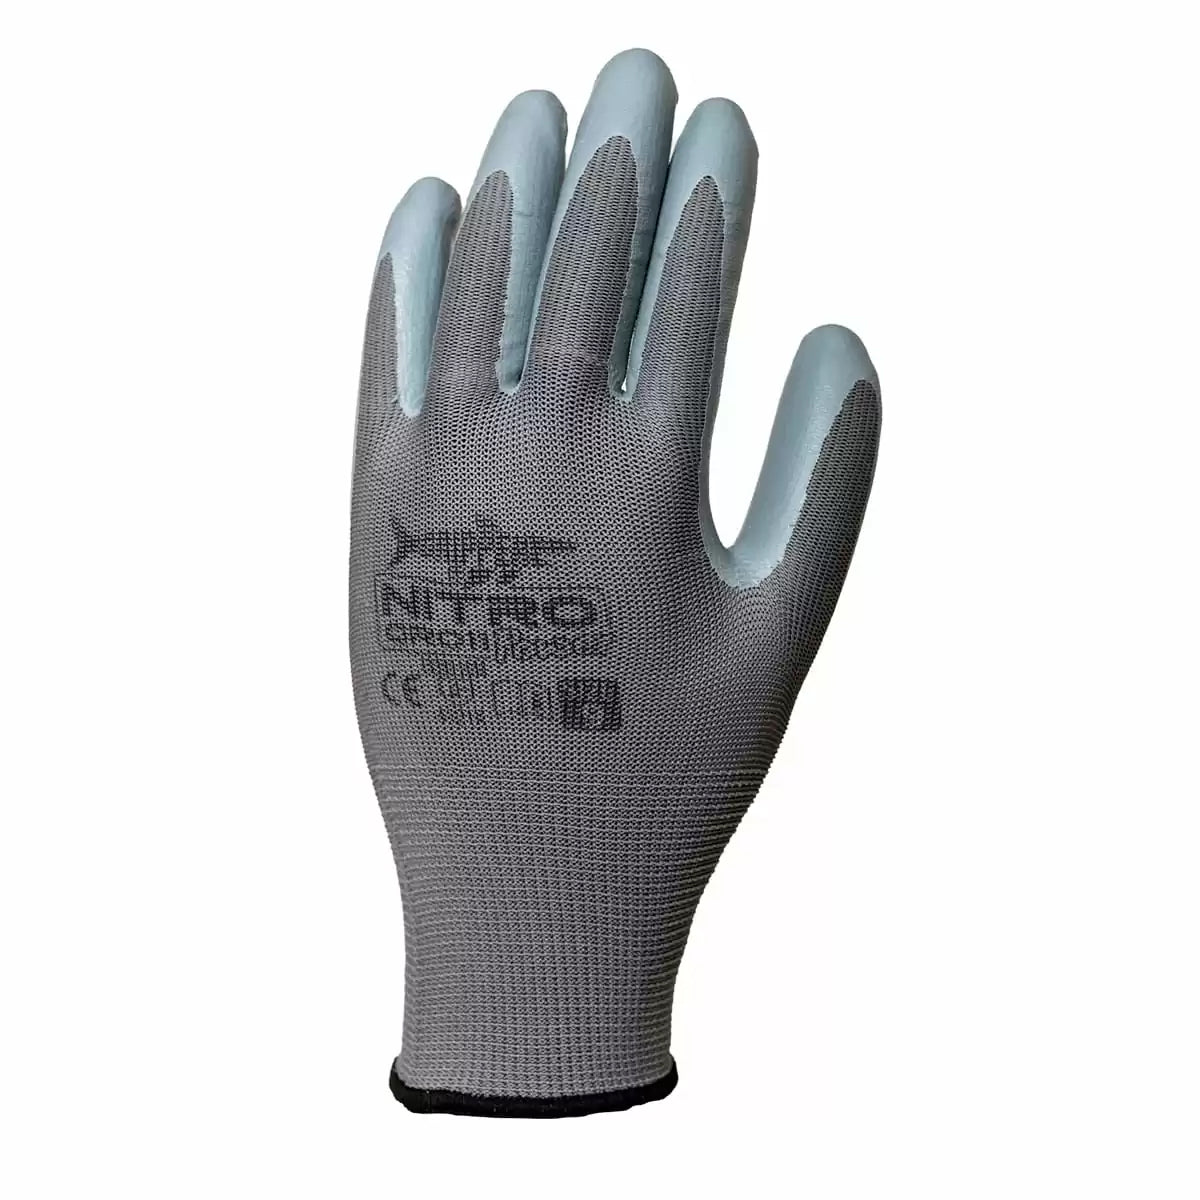 Laurus Work Gloves, Protective Gloves with Nitrile Coating, Abrasion and Cut Resistant, Size 10